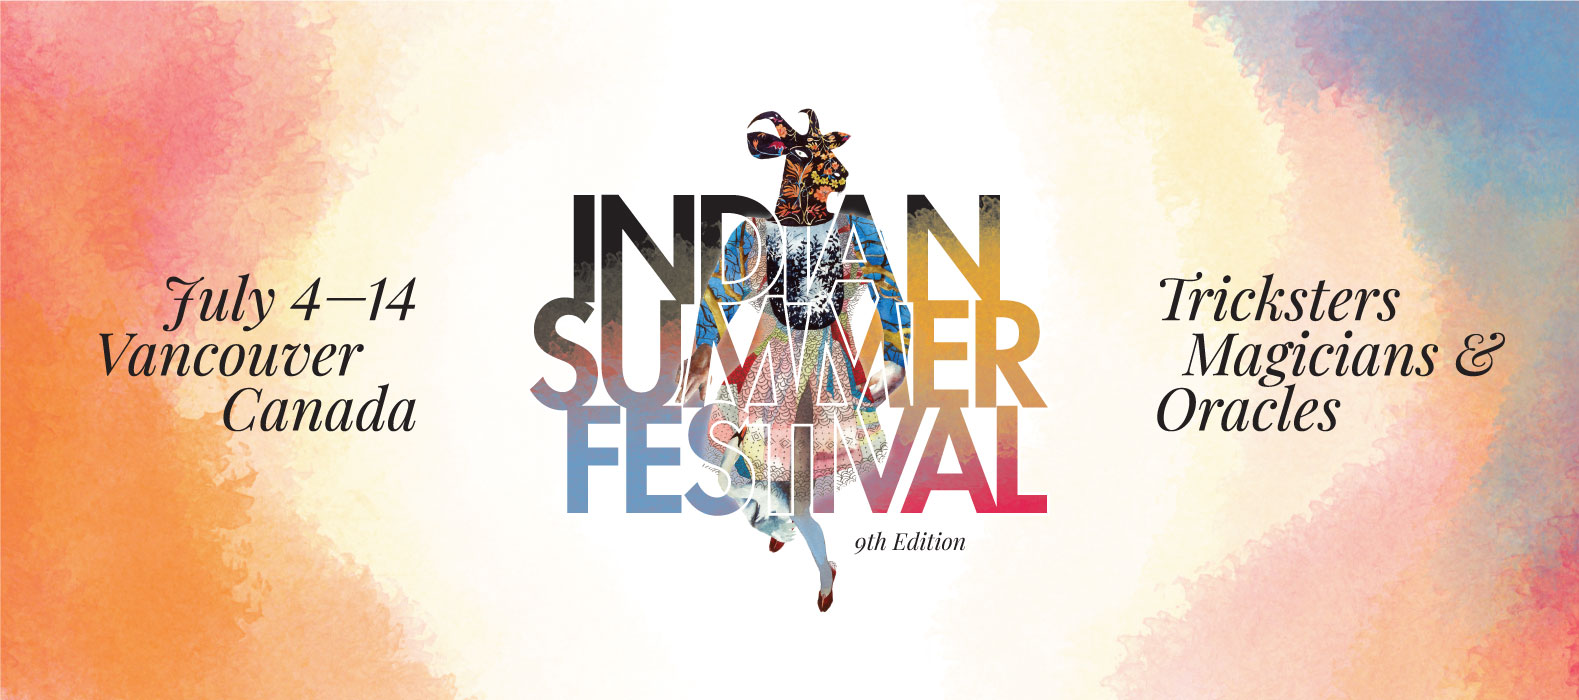 What to Expect at Indian Summer Festival 2019 in Vancouver